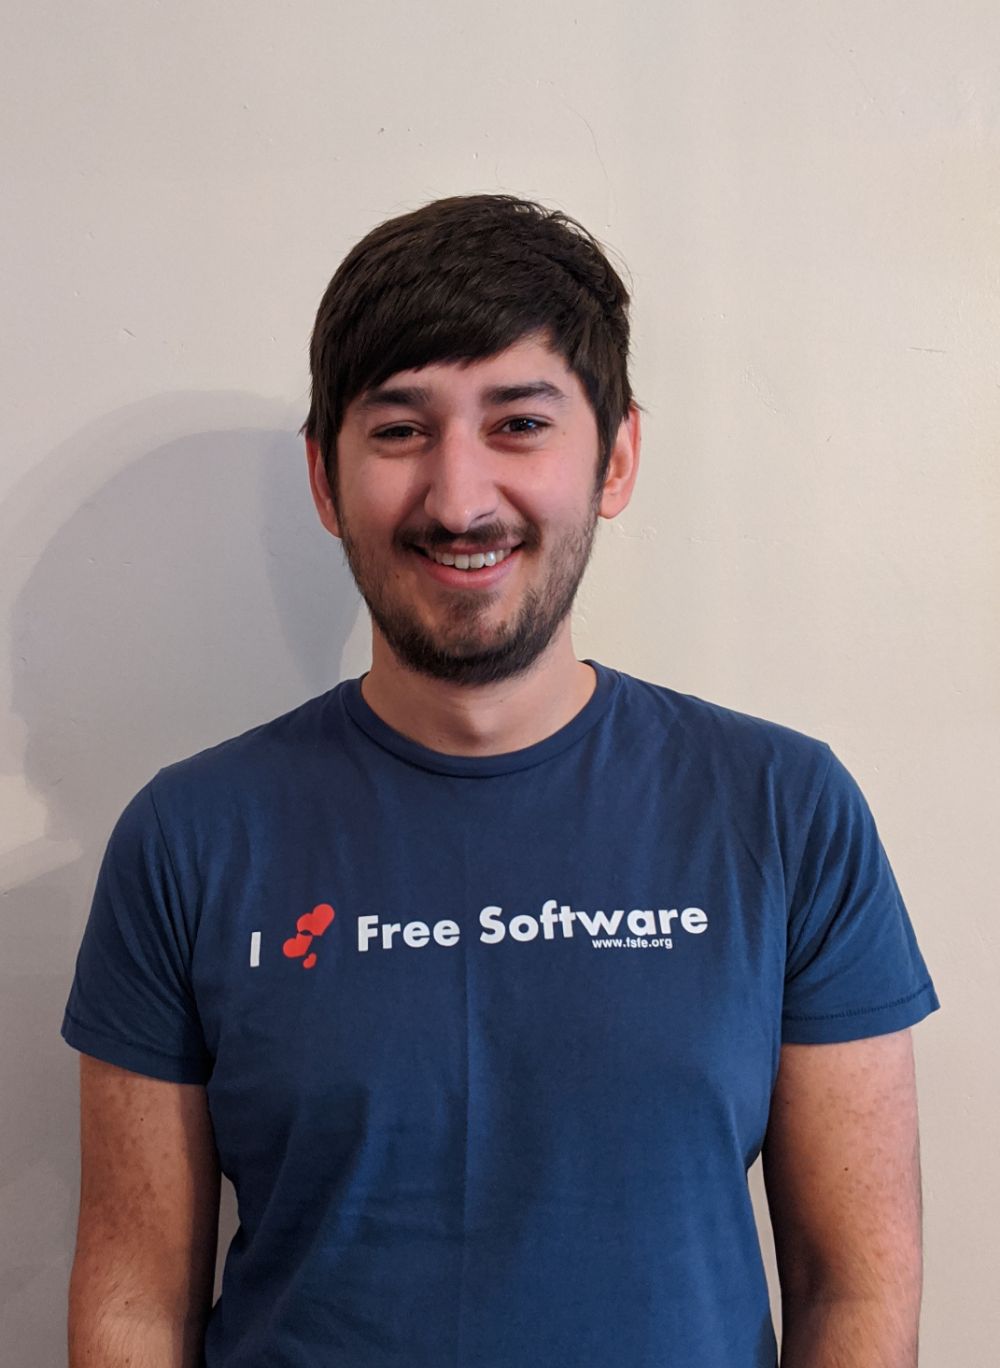 Jamie in an "I heart Free Software tshirt"